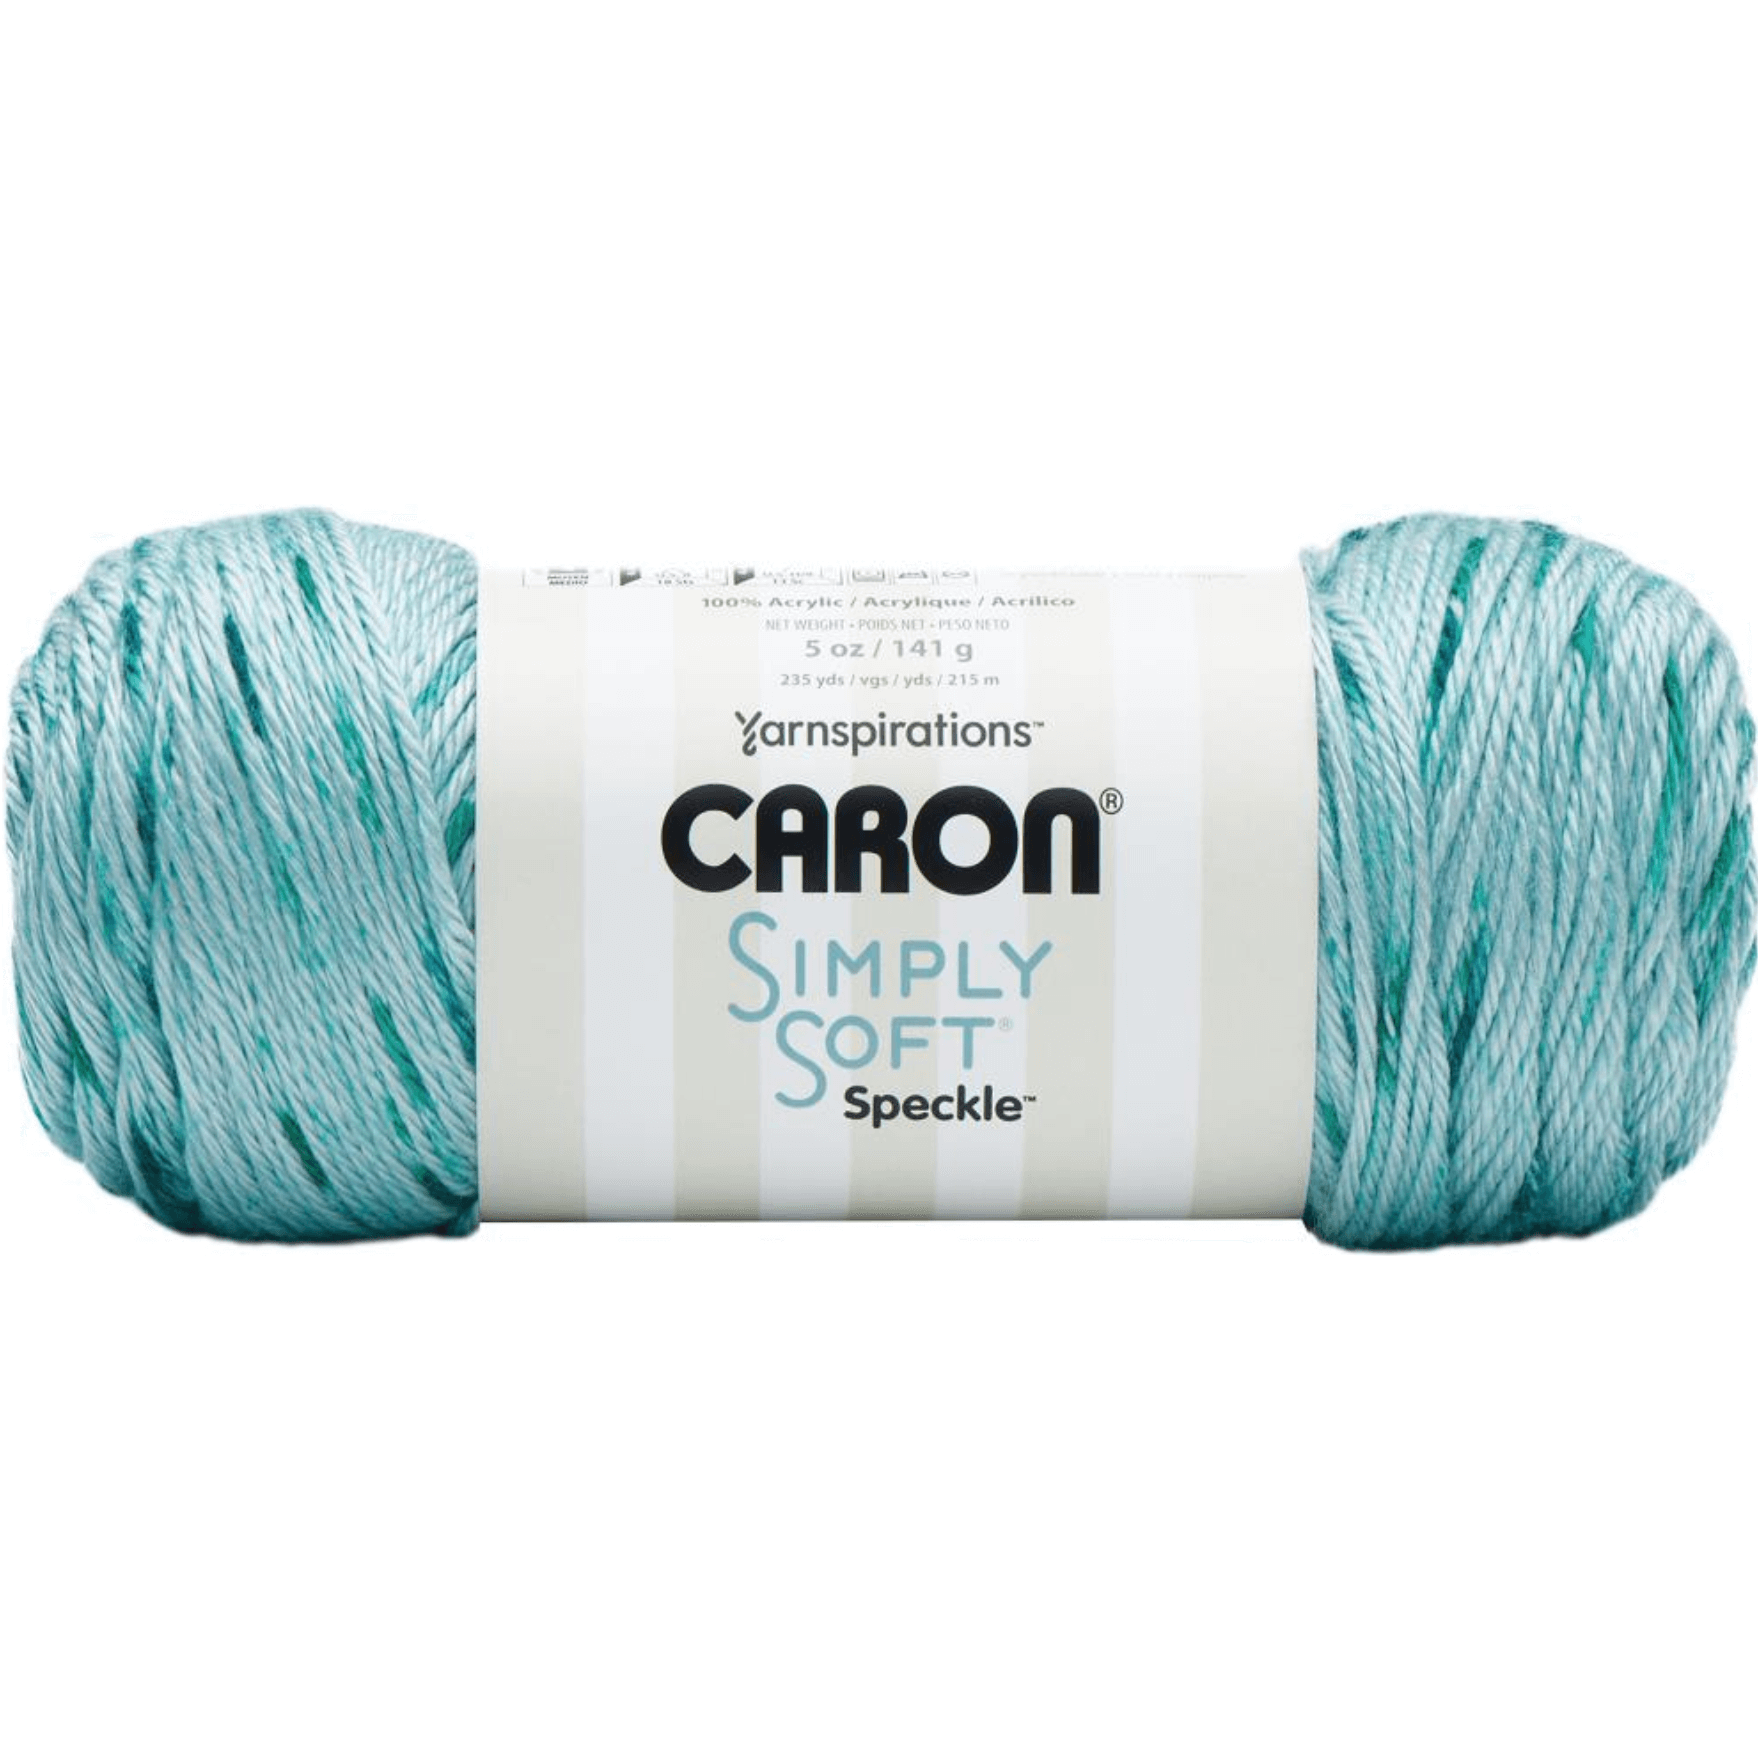 Caron Simply Soft Speckle Yarn Sold As A 3 Pack